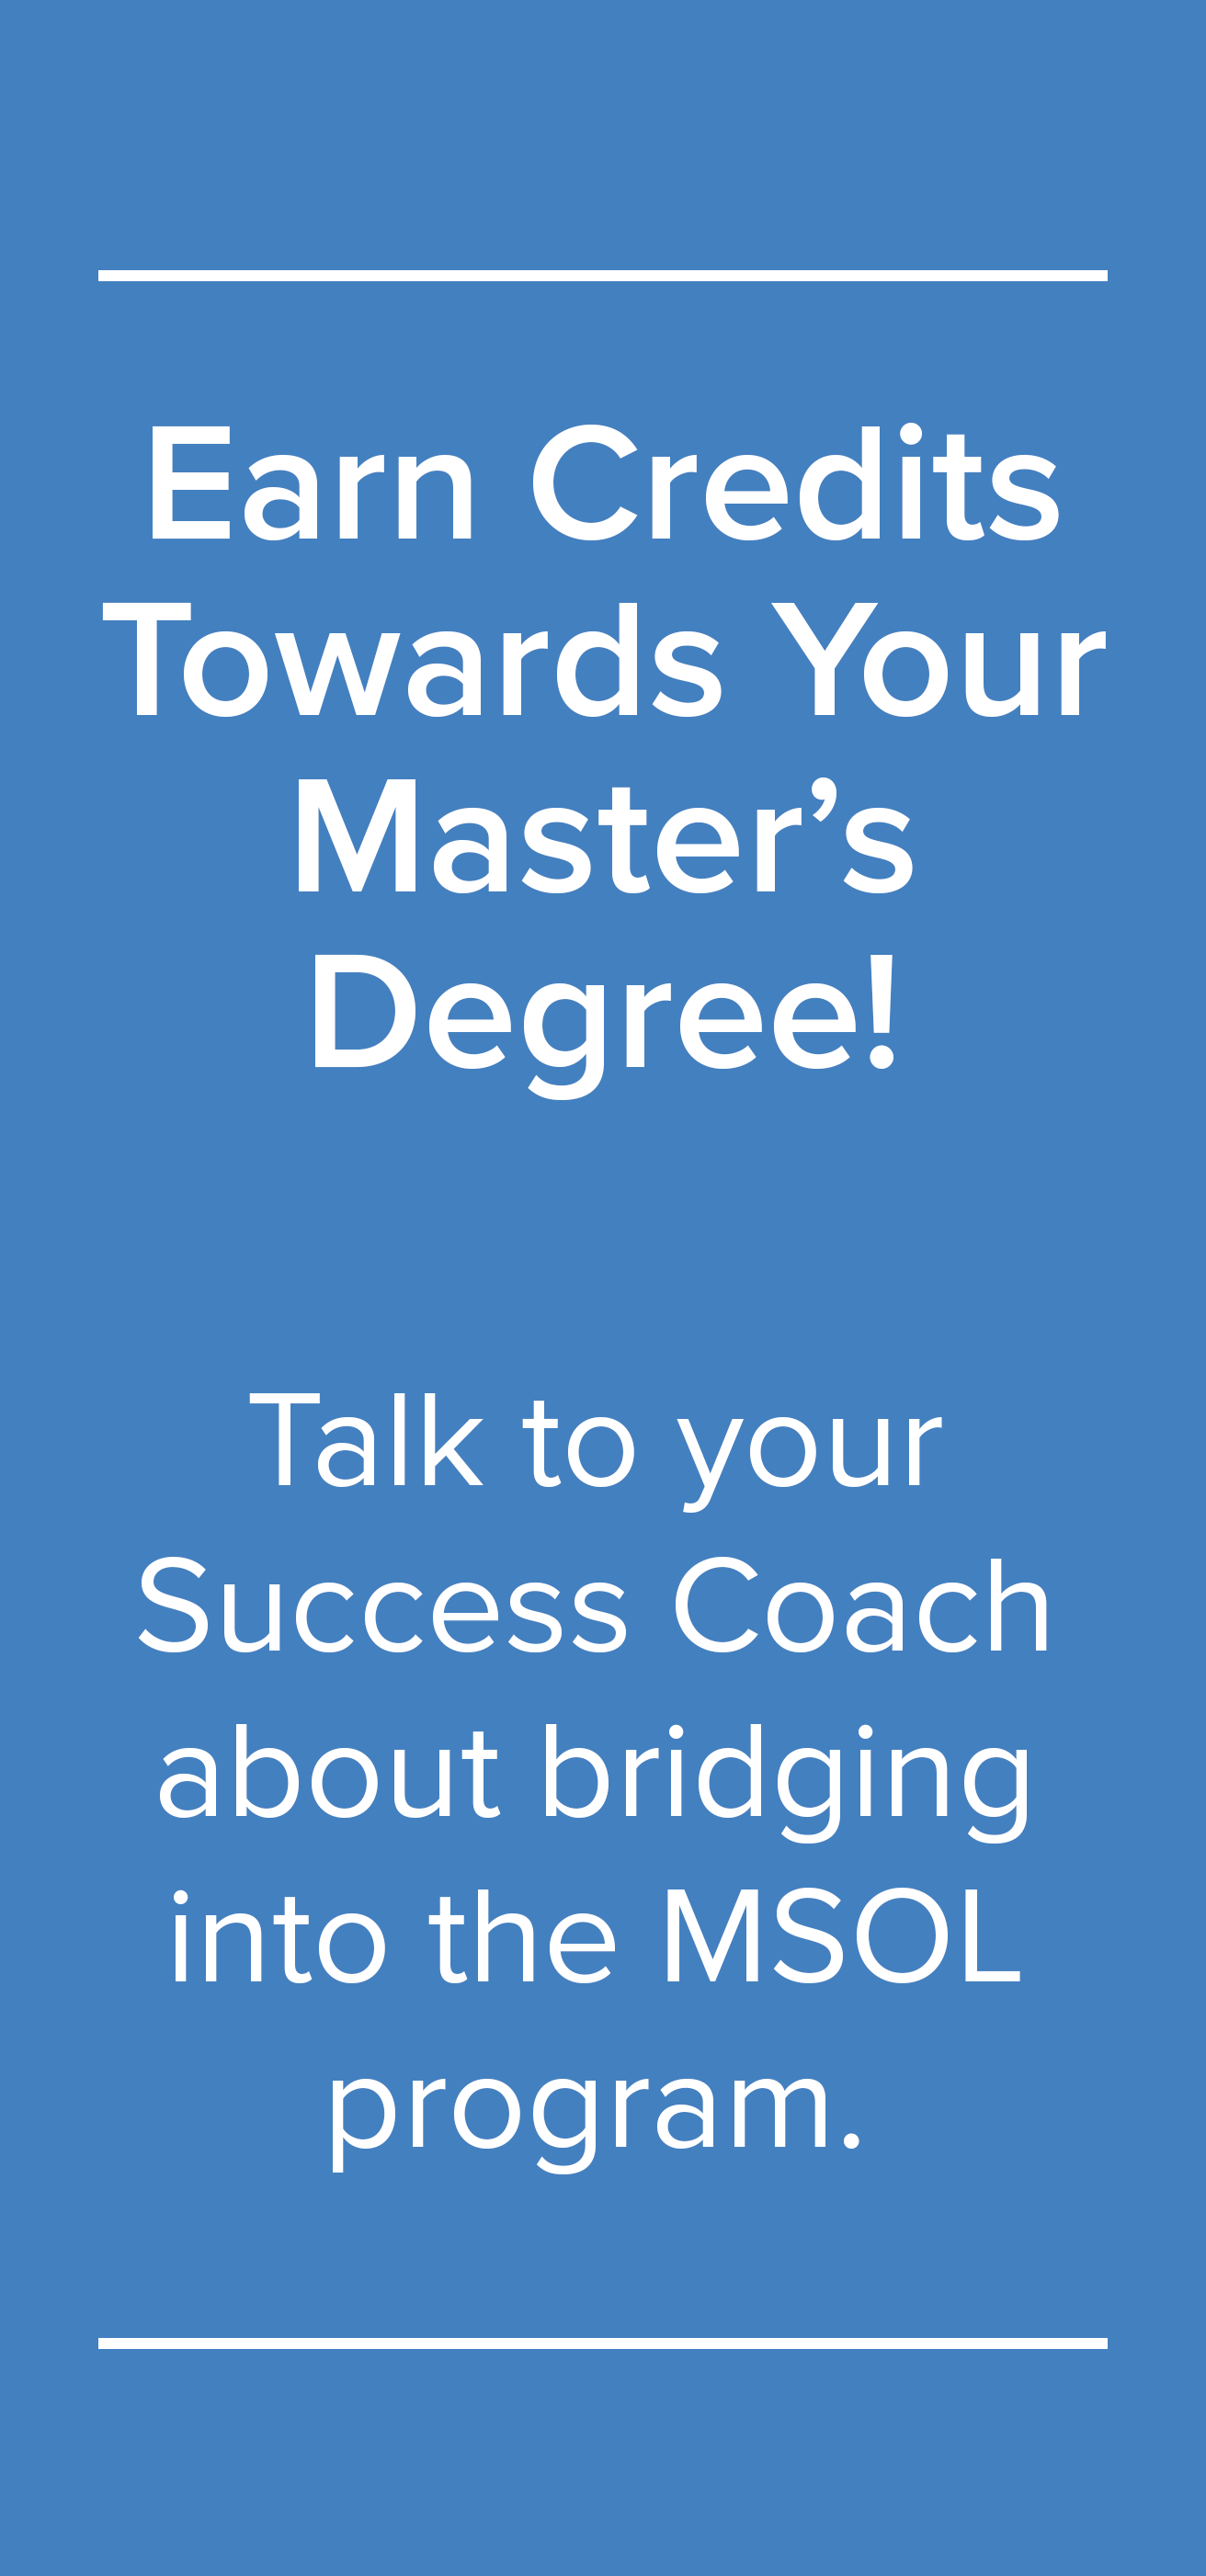 Earn Credits Towards Your Master's Degree